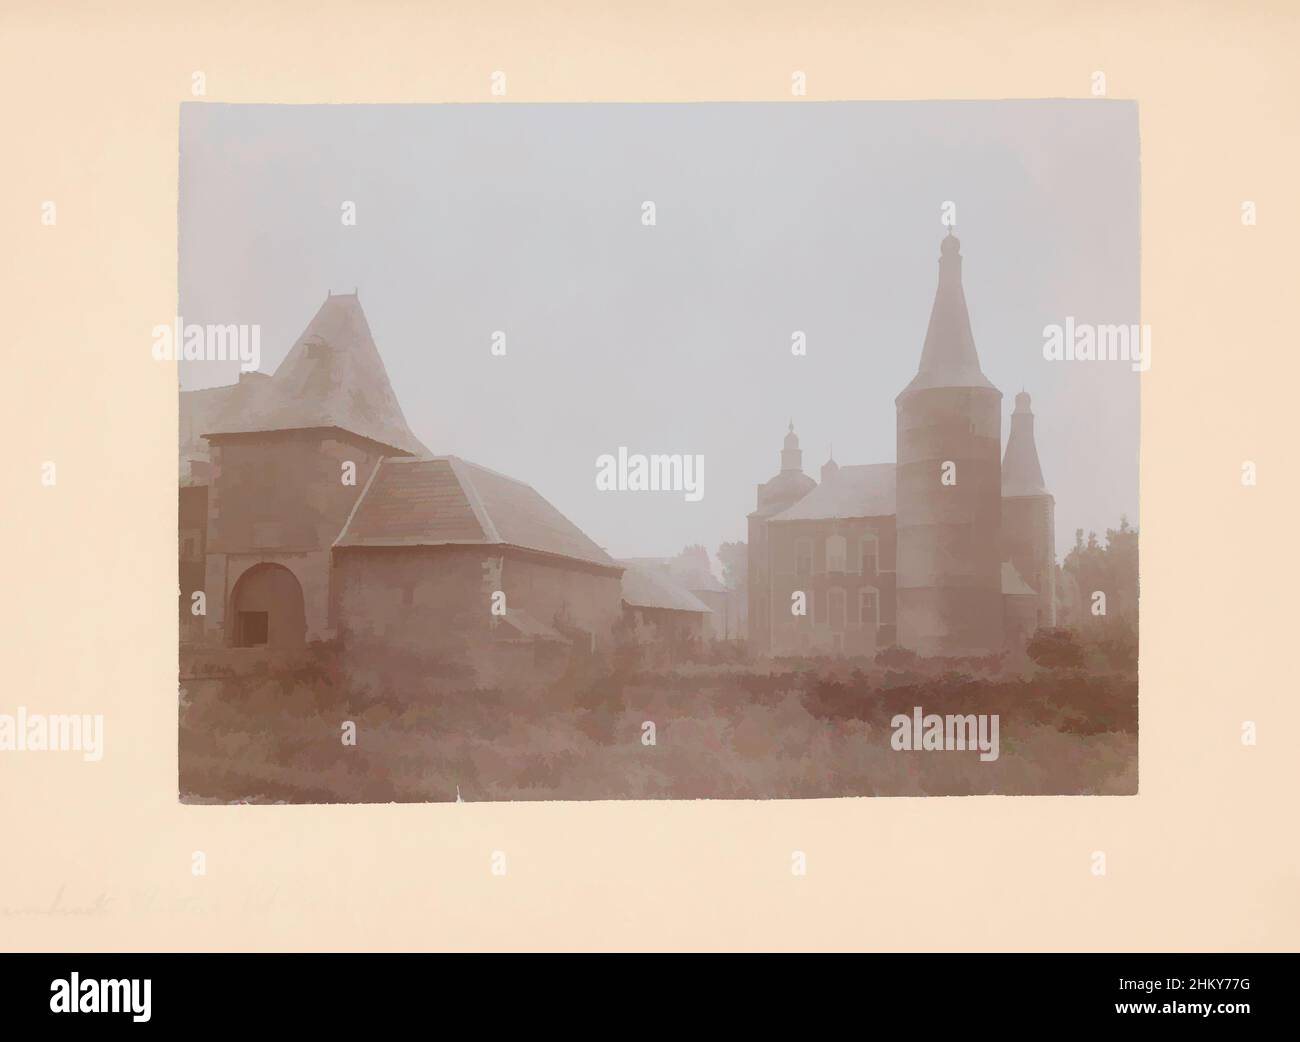 Art inspired by Castle Hoensbroek, anoniem (Monumentenzorg) (attributed to), Hoensbroek, 1910, photographic support, cardboard, height 161 mm × width 221 mm, Classic works modernized by Artotop with a splash of modernity. Shapes, color and value, eye-catching visual impact on art. Emotions through freedom of artworks in a contemporary way. A timeless message pursuing a wildly creative new direction. Artists turning to the digital medium and creating the Artotop NFT Stock Photo